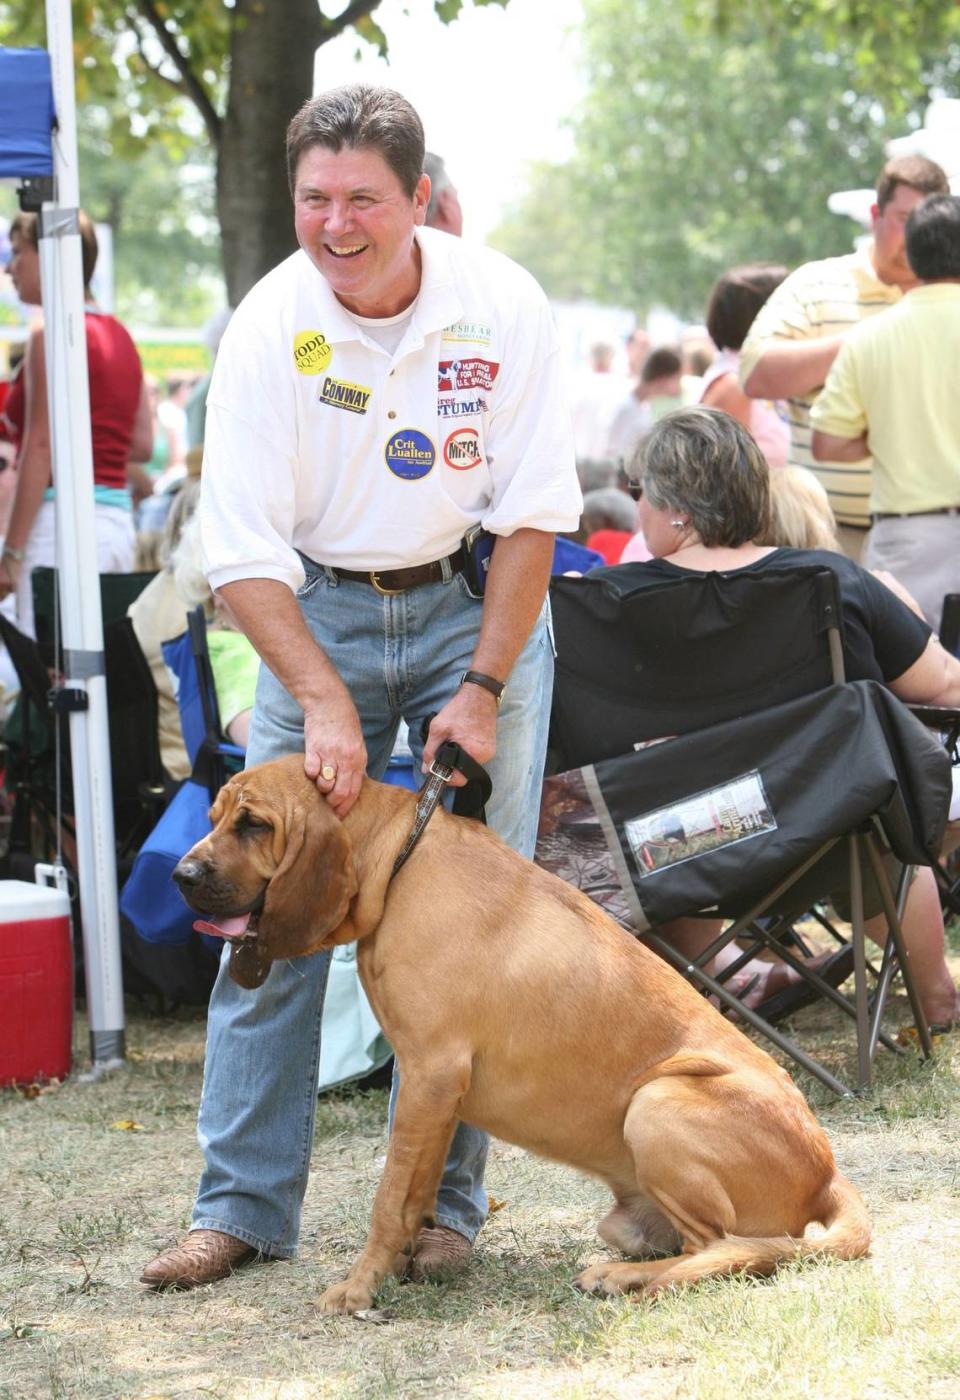 Attorney General Greg Stumbo walked around with blood hounds at the annual Fancy Farm political picnic held at the St. Jerome Catholic Church in Fancy Farm, Ky., Saturday, August 4, 2007. He said the blood hounds were “hunting for a real U.S. Senator” a reference to Mitch McConnell. Photo by Charles Bertram | Staff. 3699